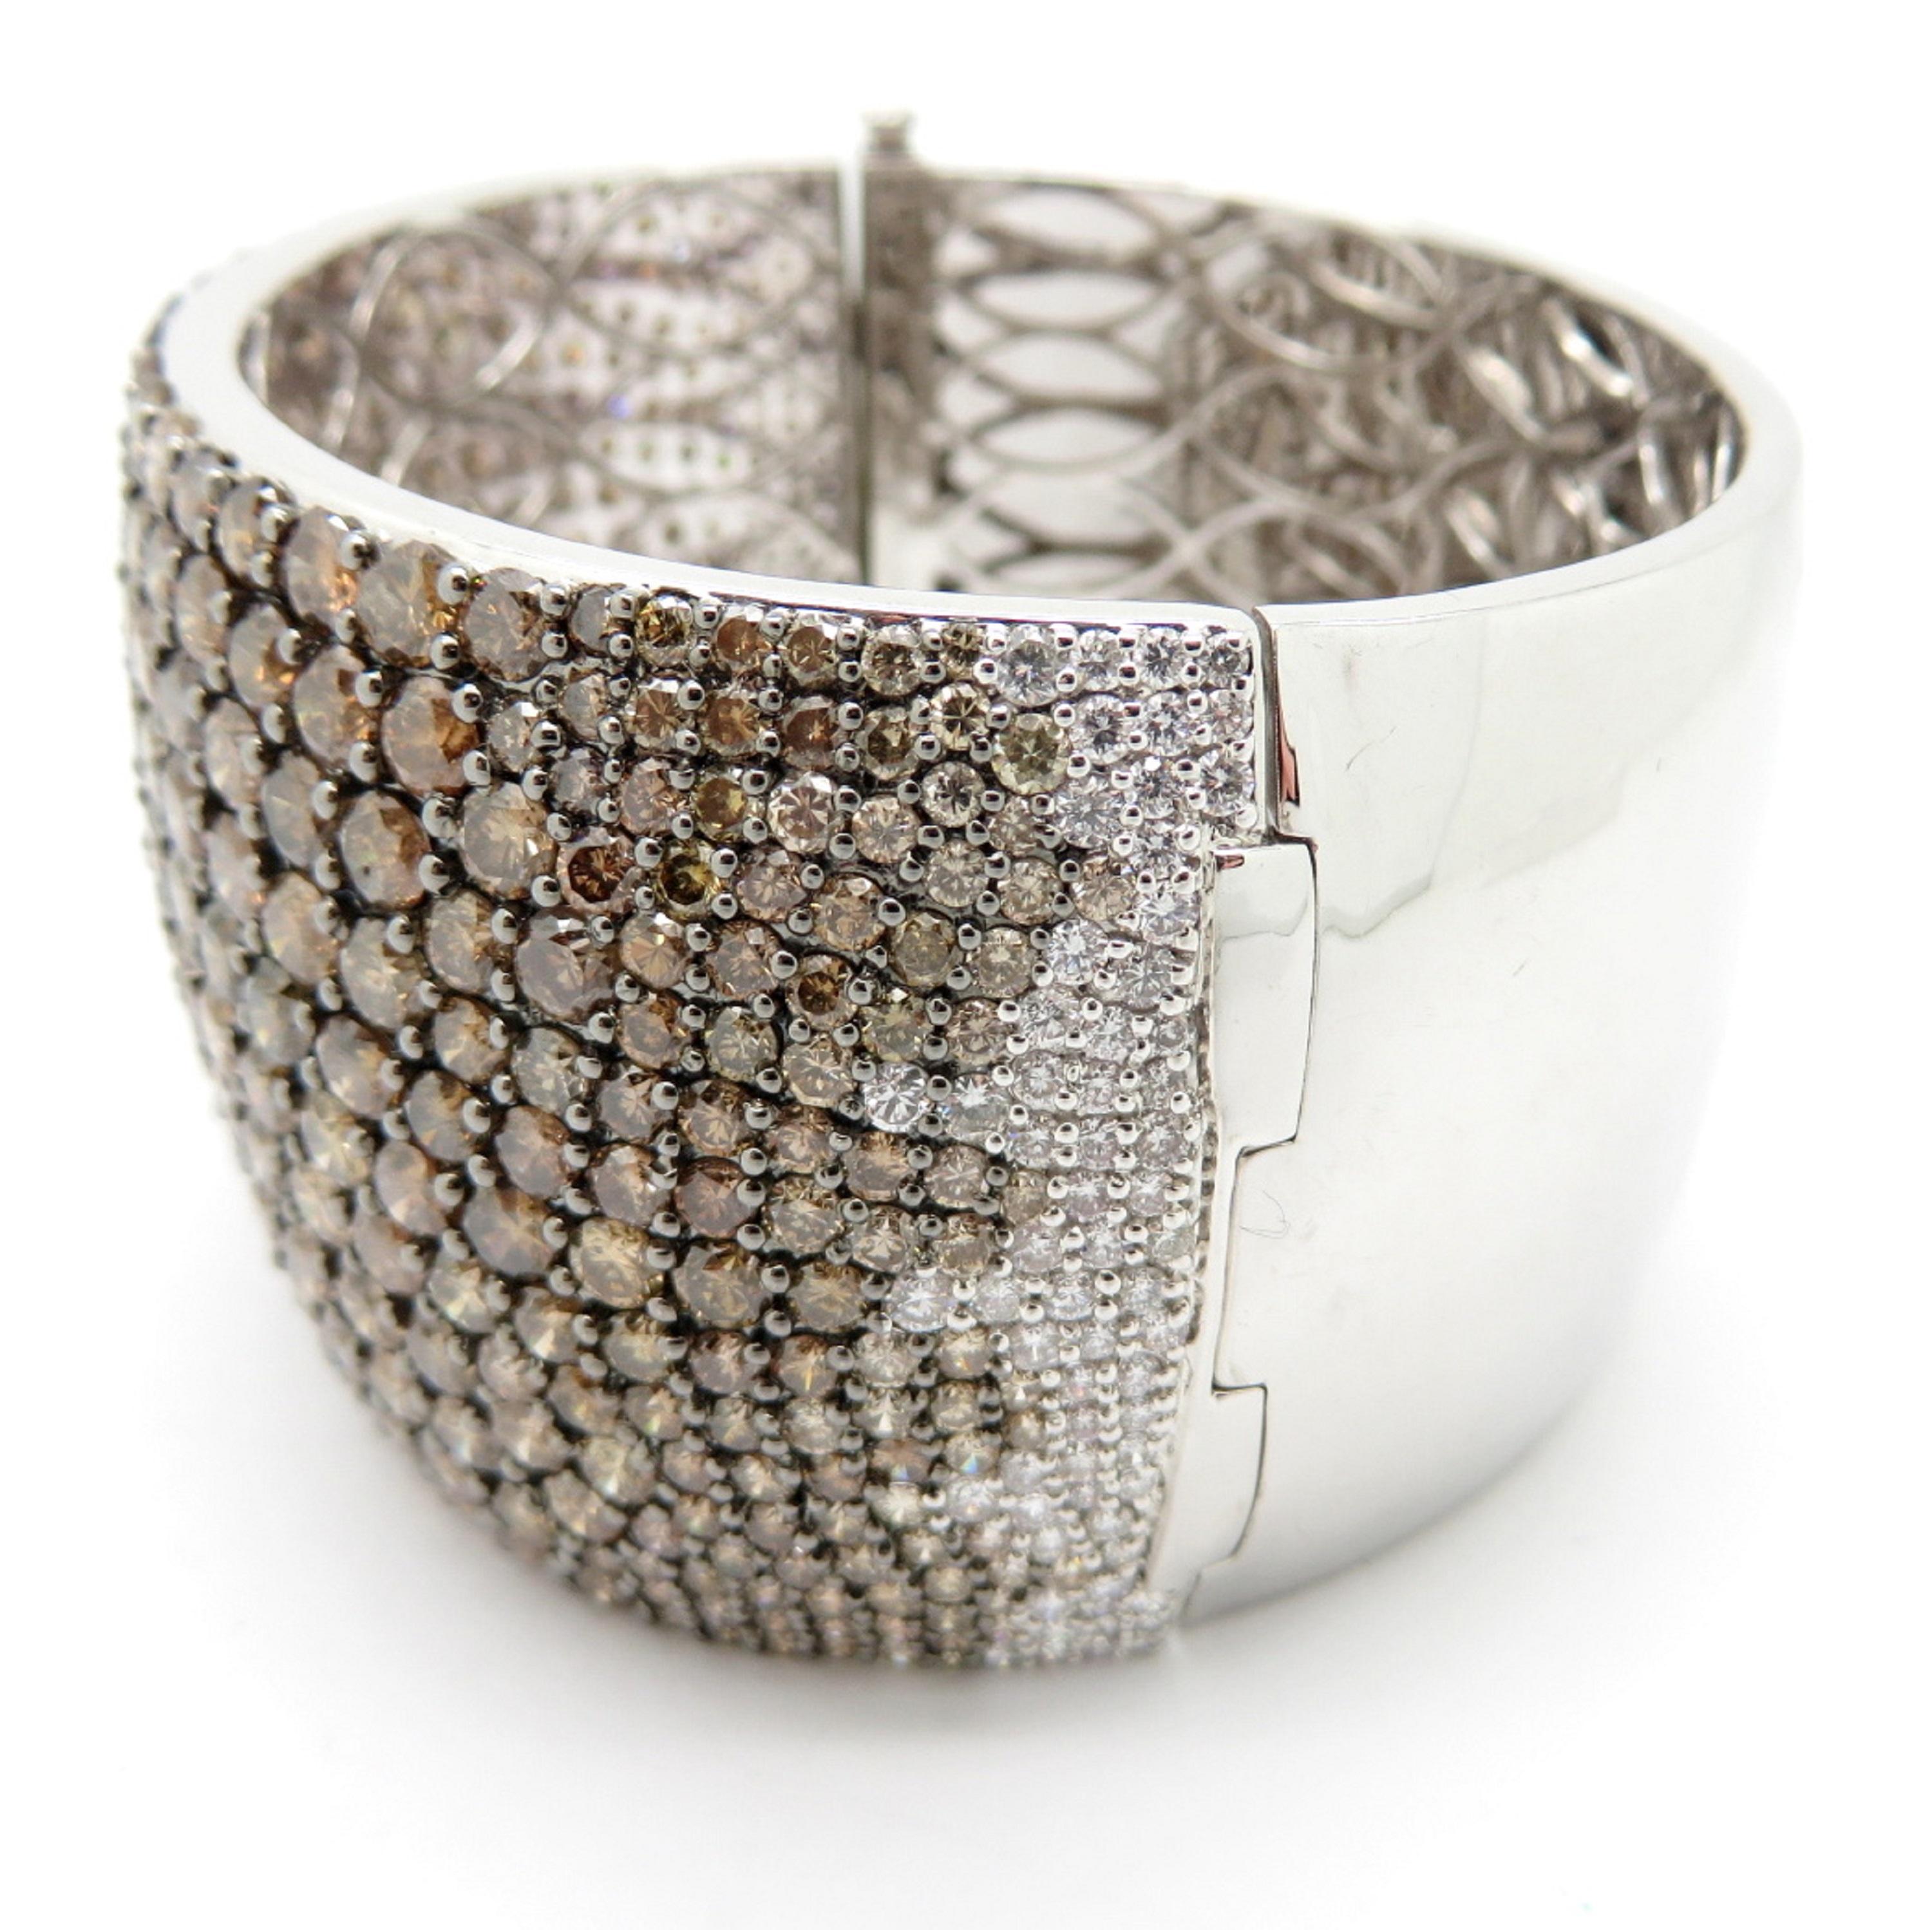 For sale is a stunning 18K White Gold Brown & White Diamond Pave Bangle Bracelet!
Showcasing 462 Brown Round Brilliant Cut diamonds, pave set, weighing approximately 50.41 carats, having SI1-I2 Clarity Grade.
Interspersed through the bracelet are 68